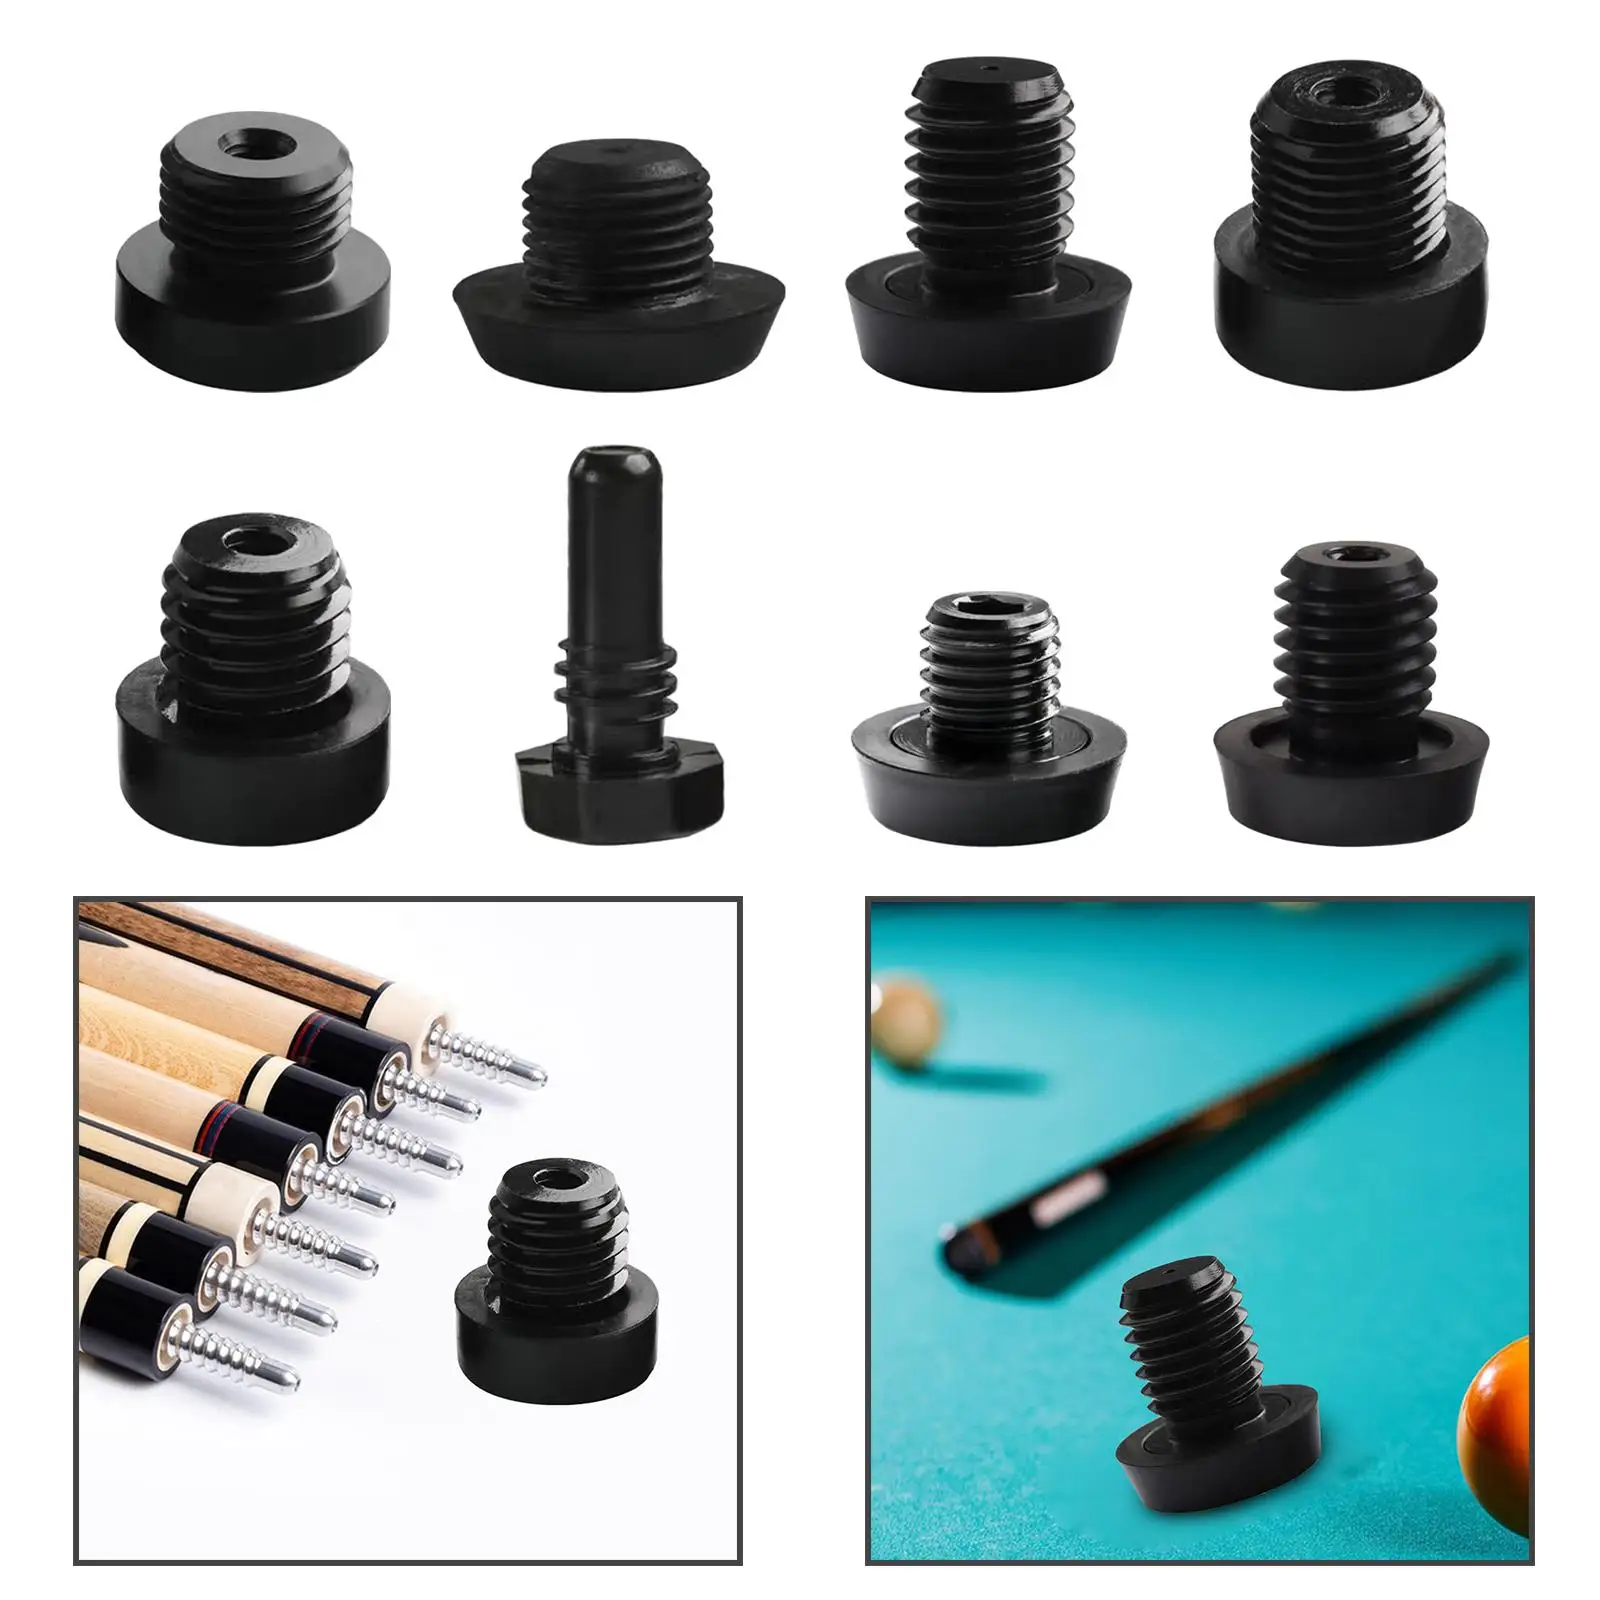 Billiard Cue Rubber Pool Cue Block End Convenient Multifunctional Practical Billiard End Connected Extension for Playing Clubs